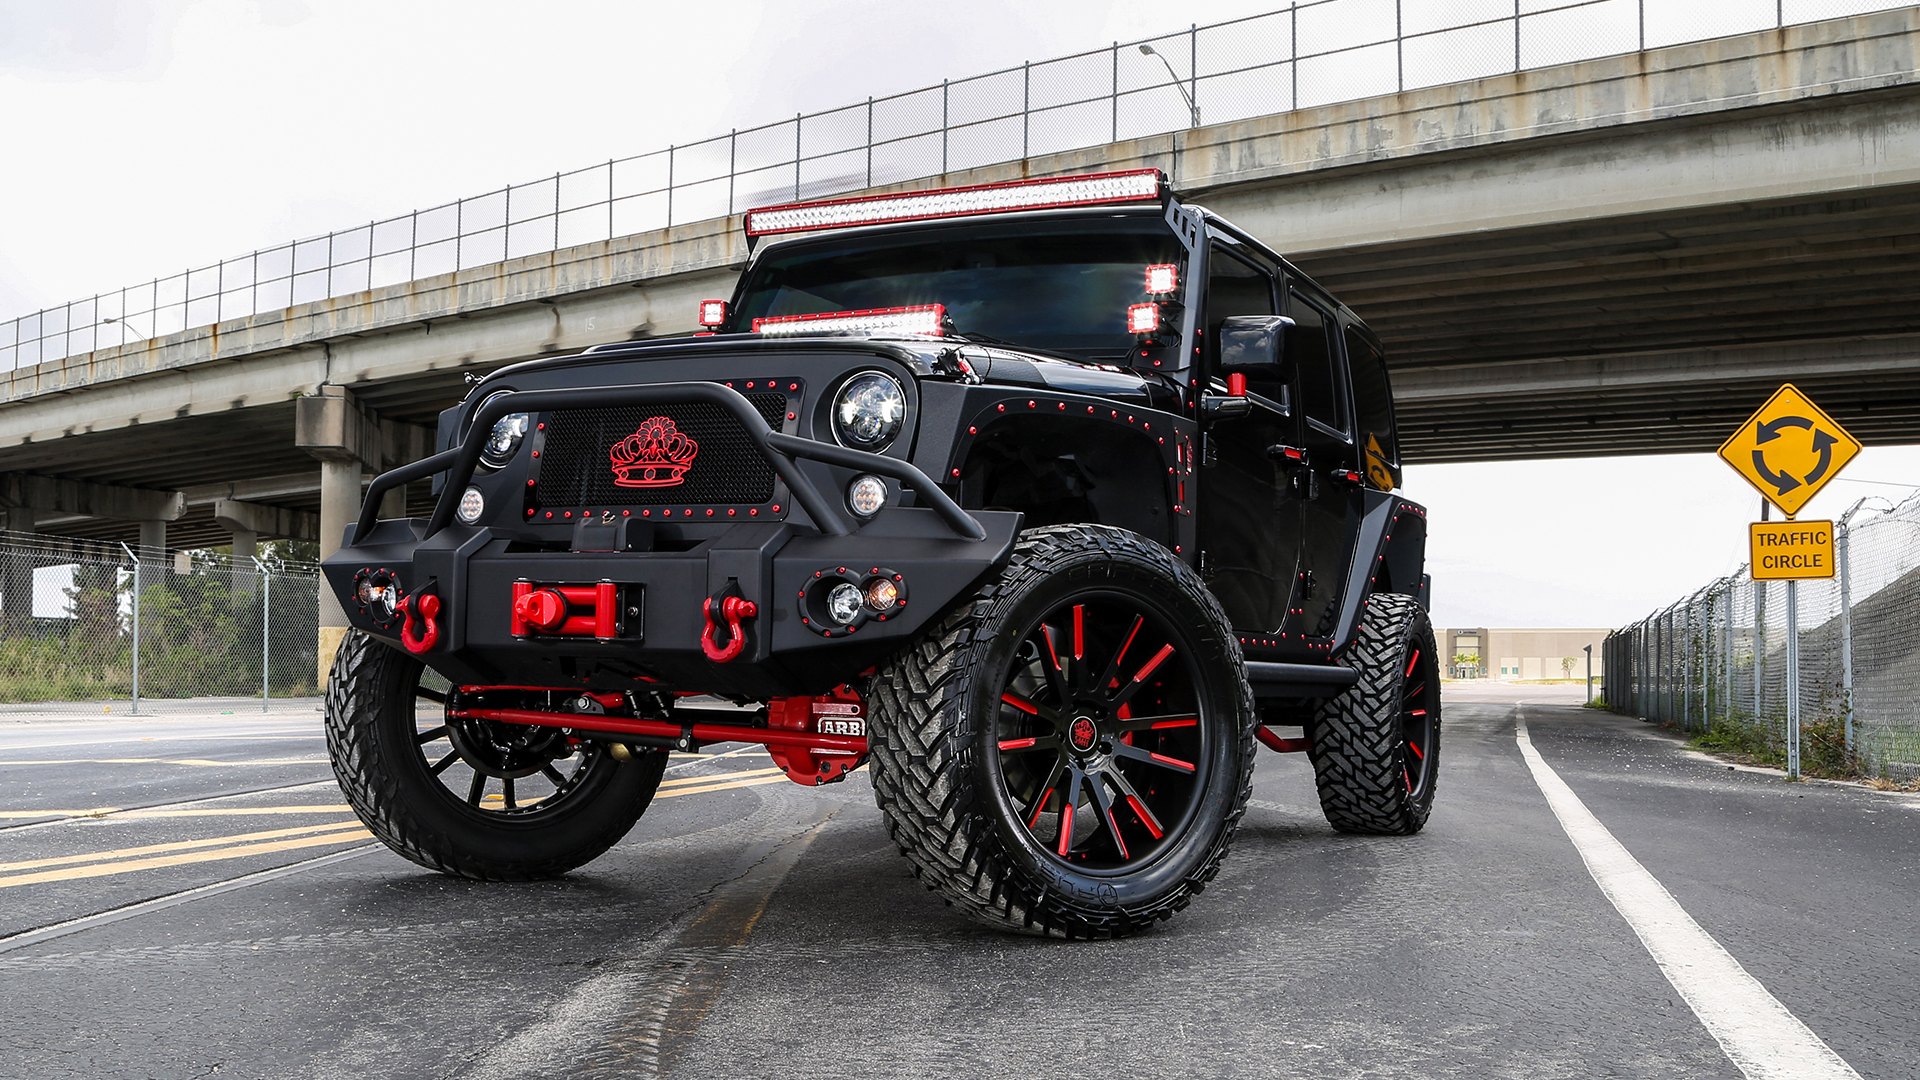 Show King - Black JK with Red Accents on Large Wheels —  Gallery